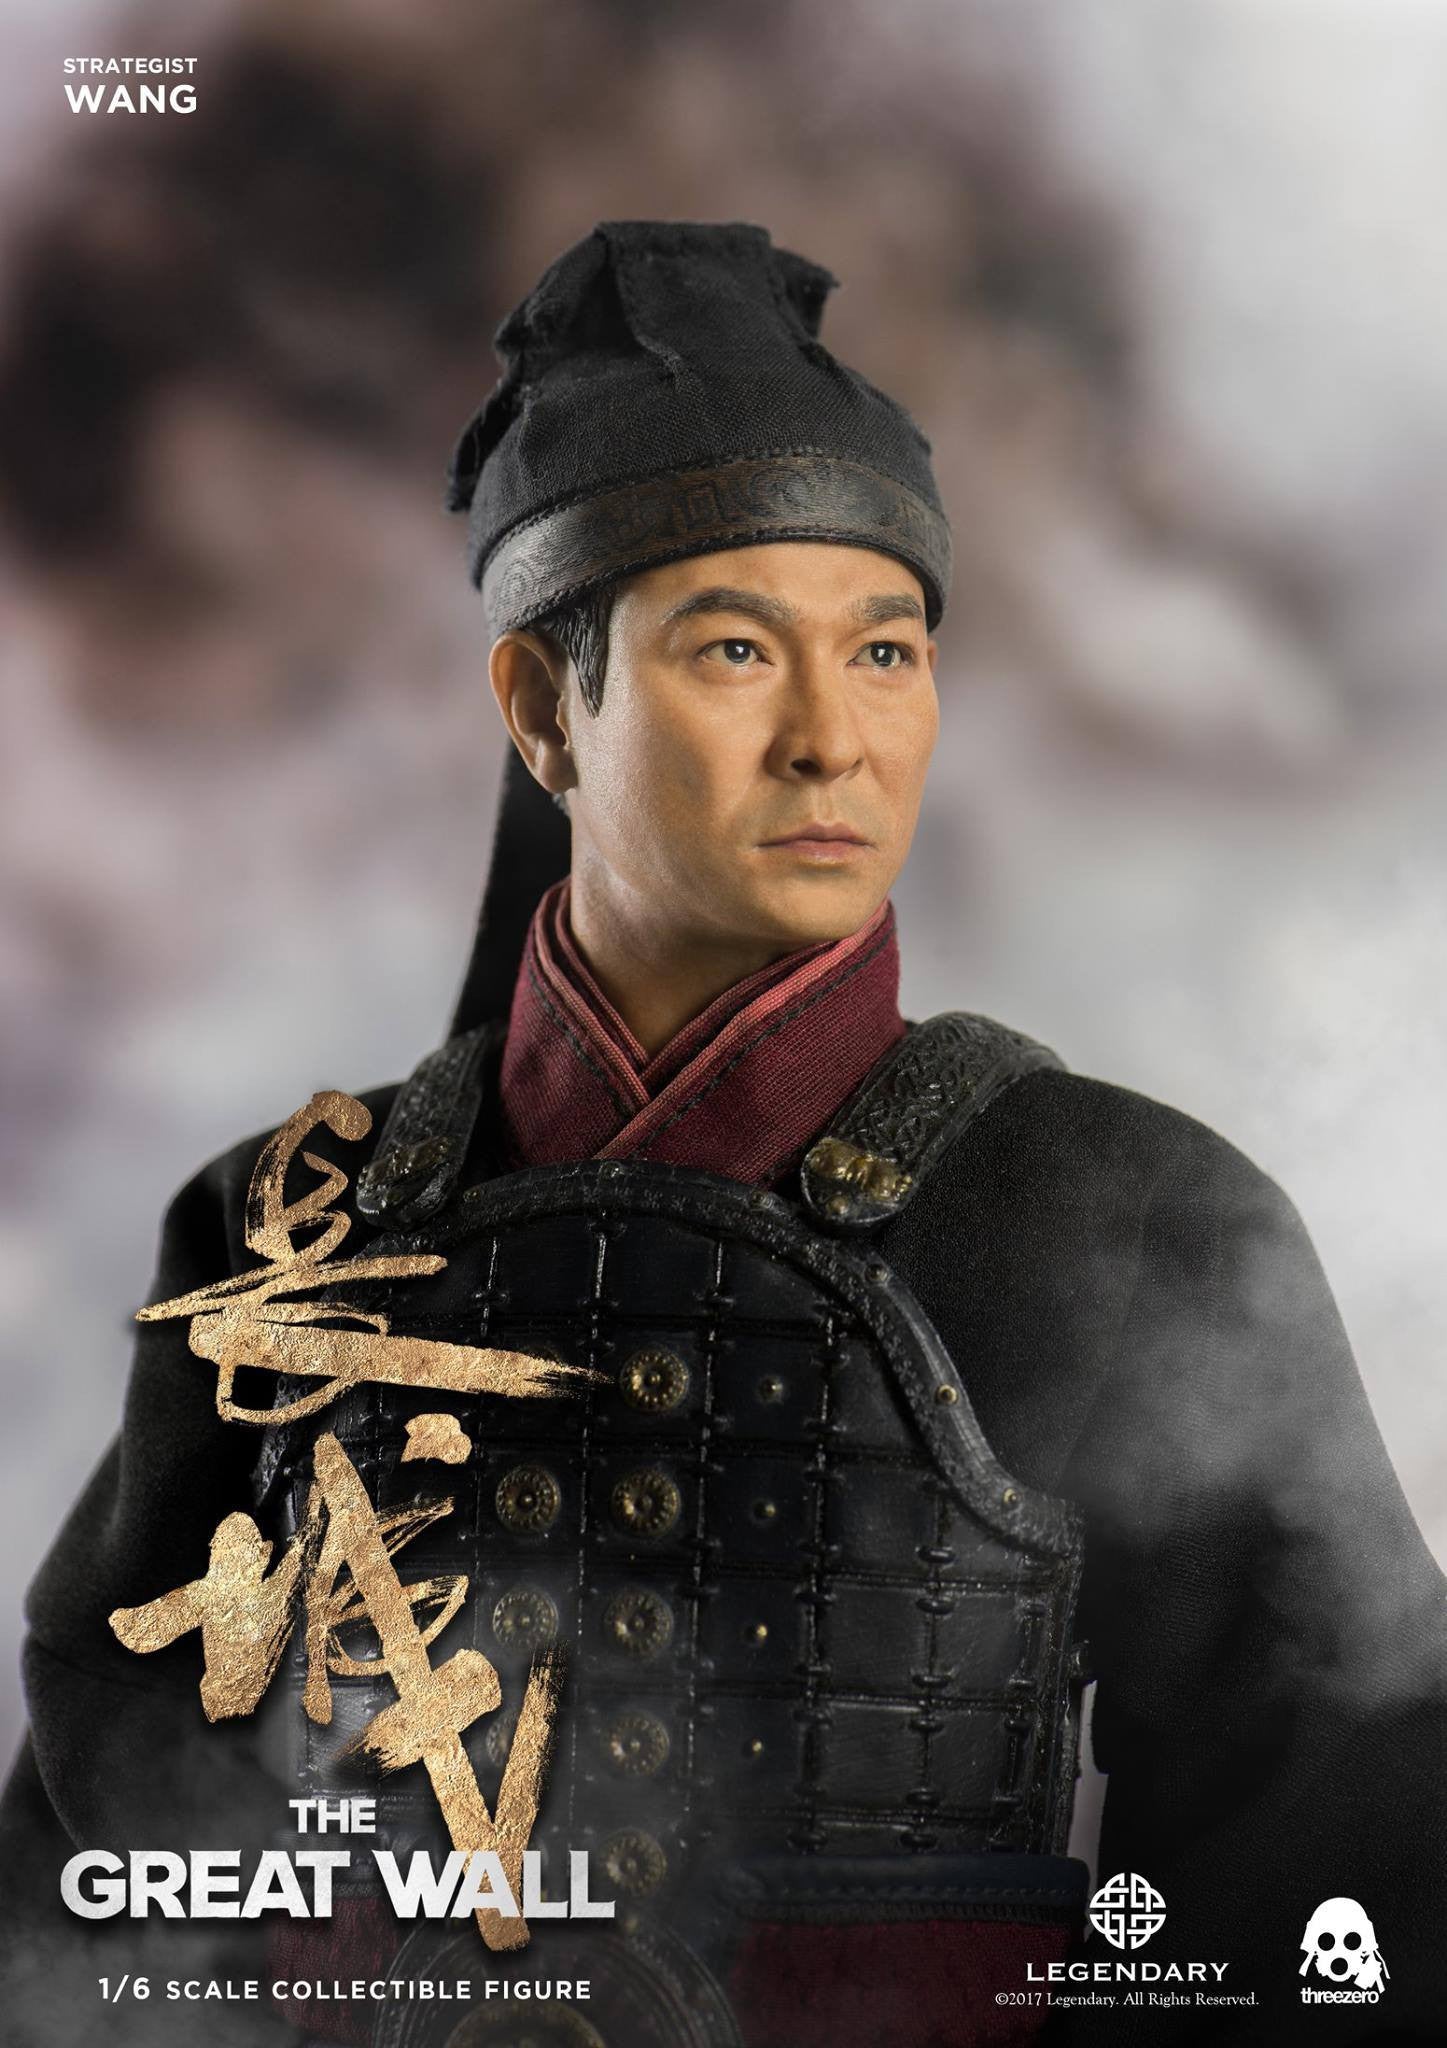 ThreeZero - The Great Wall - Strategist Wang《長城》王軍師 (1/6 Scale) - Marvelous Toys